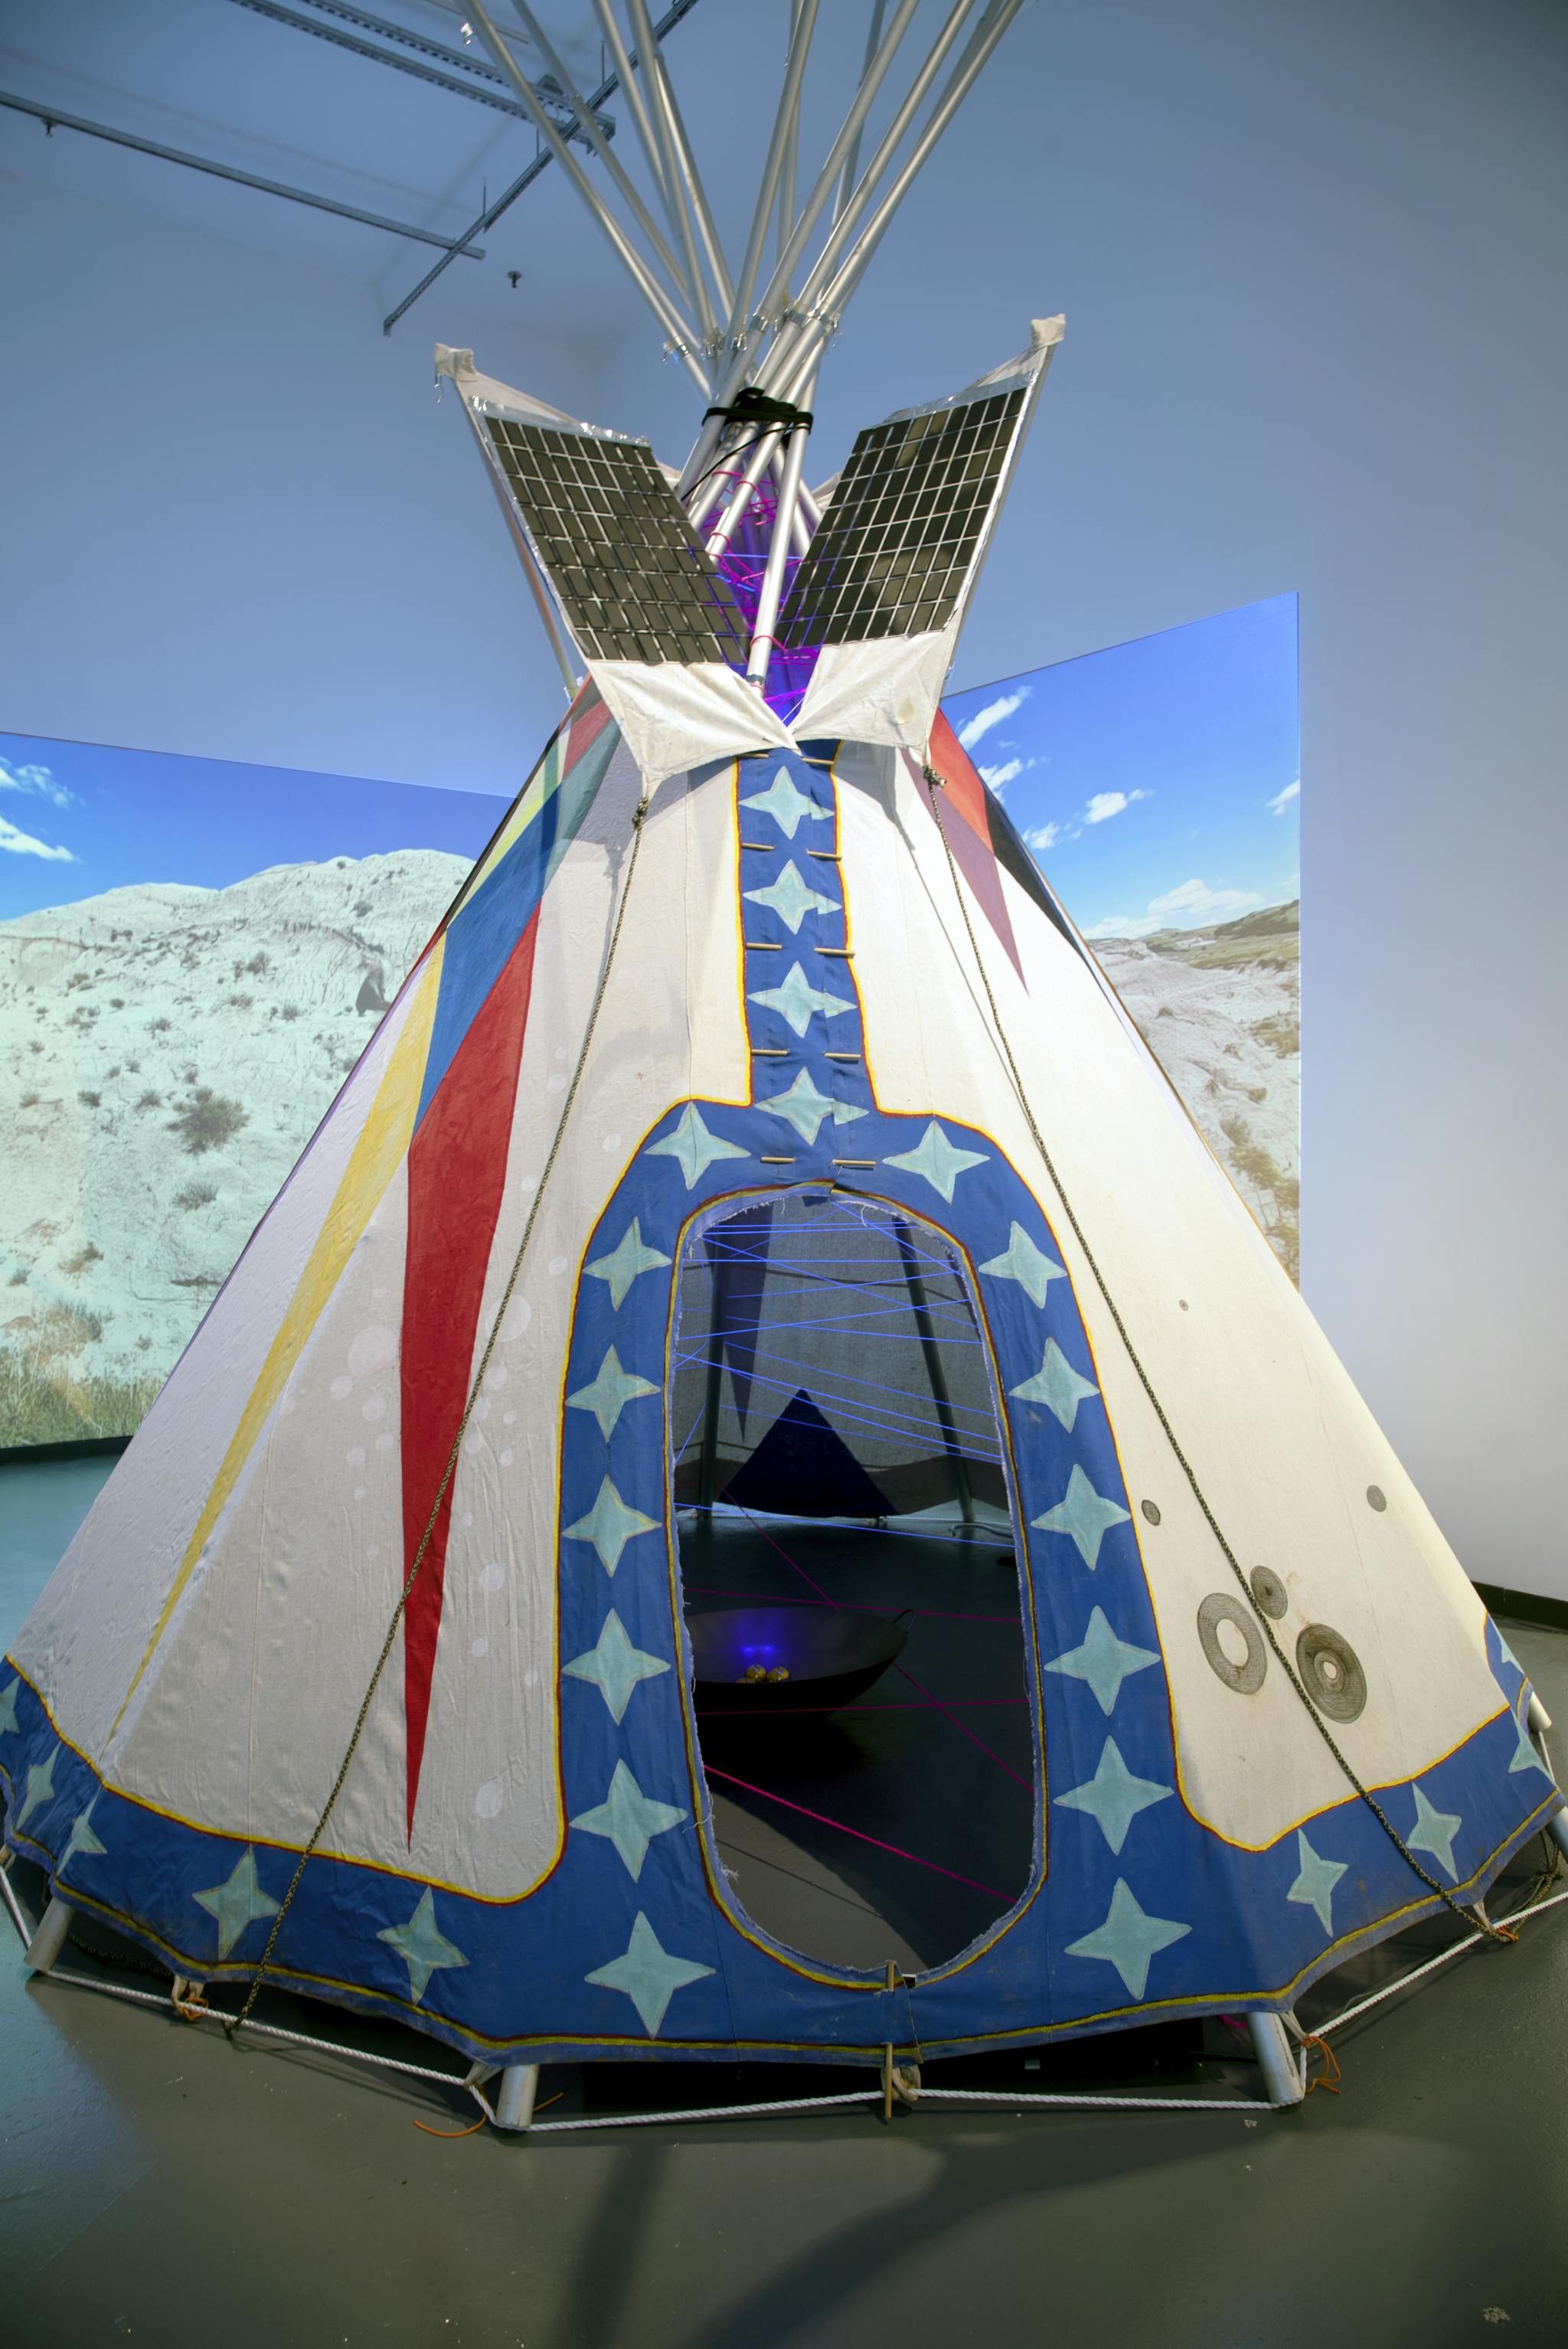 A large, colorful cloth tipi with collapsible metal support poles stands tall.